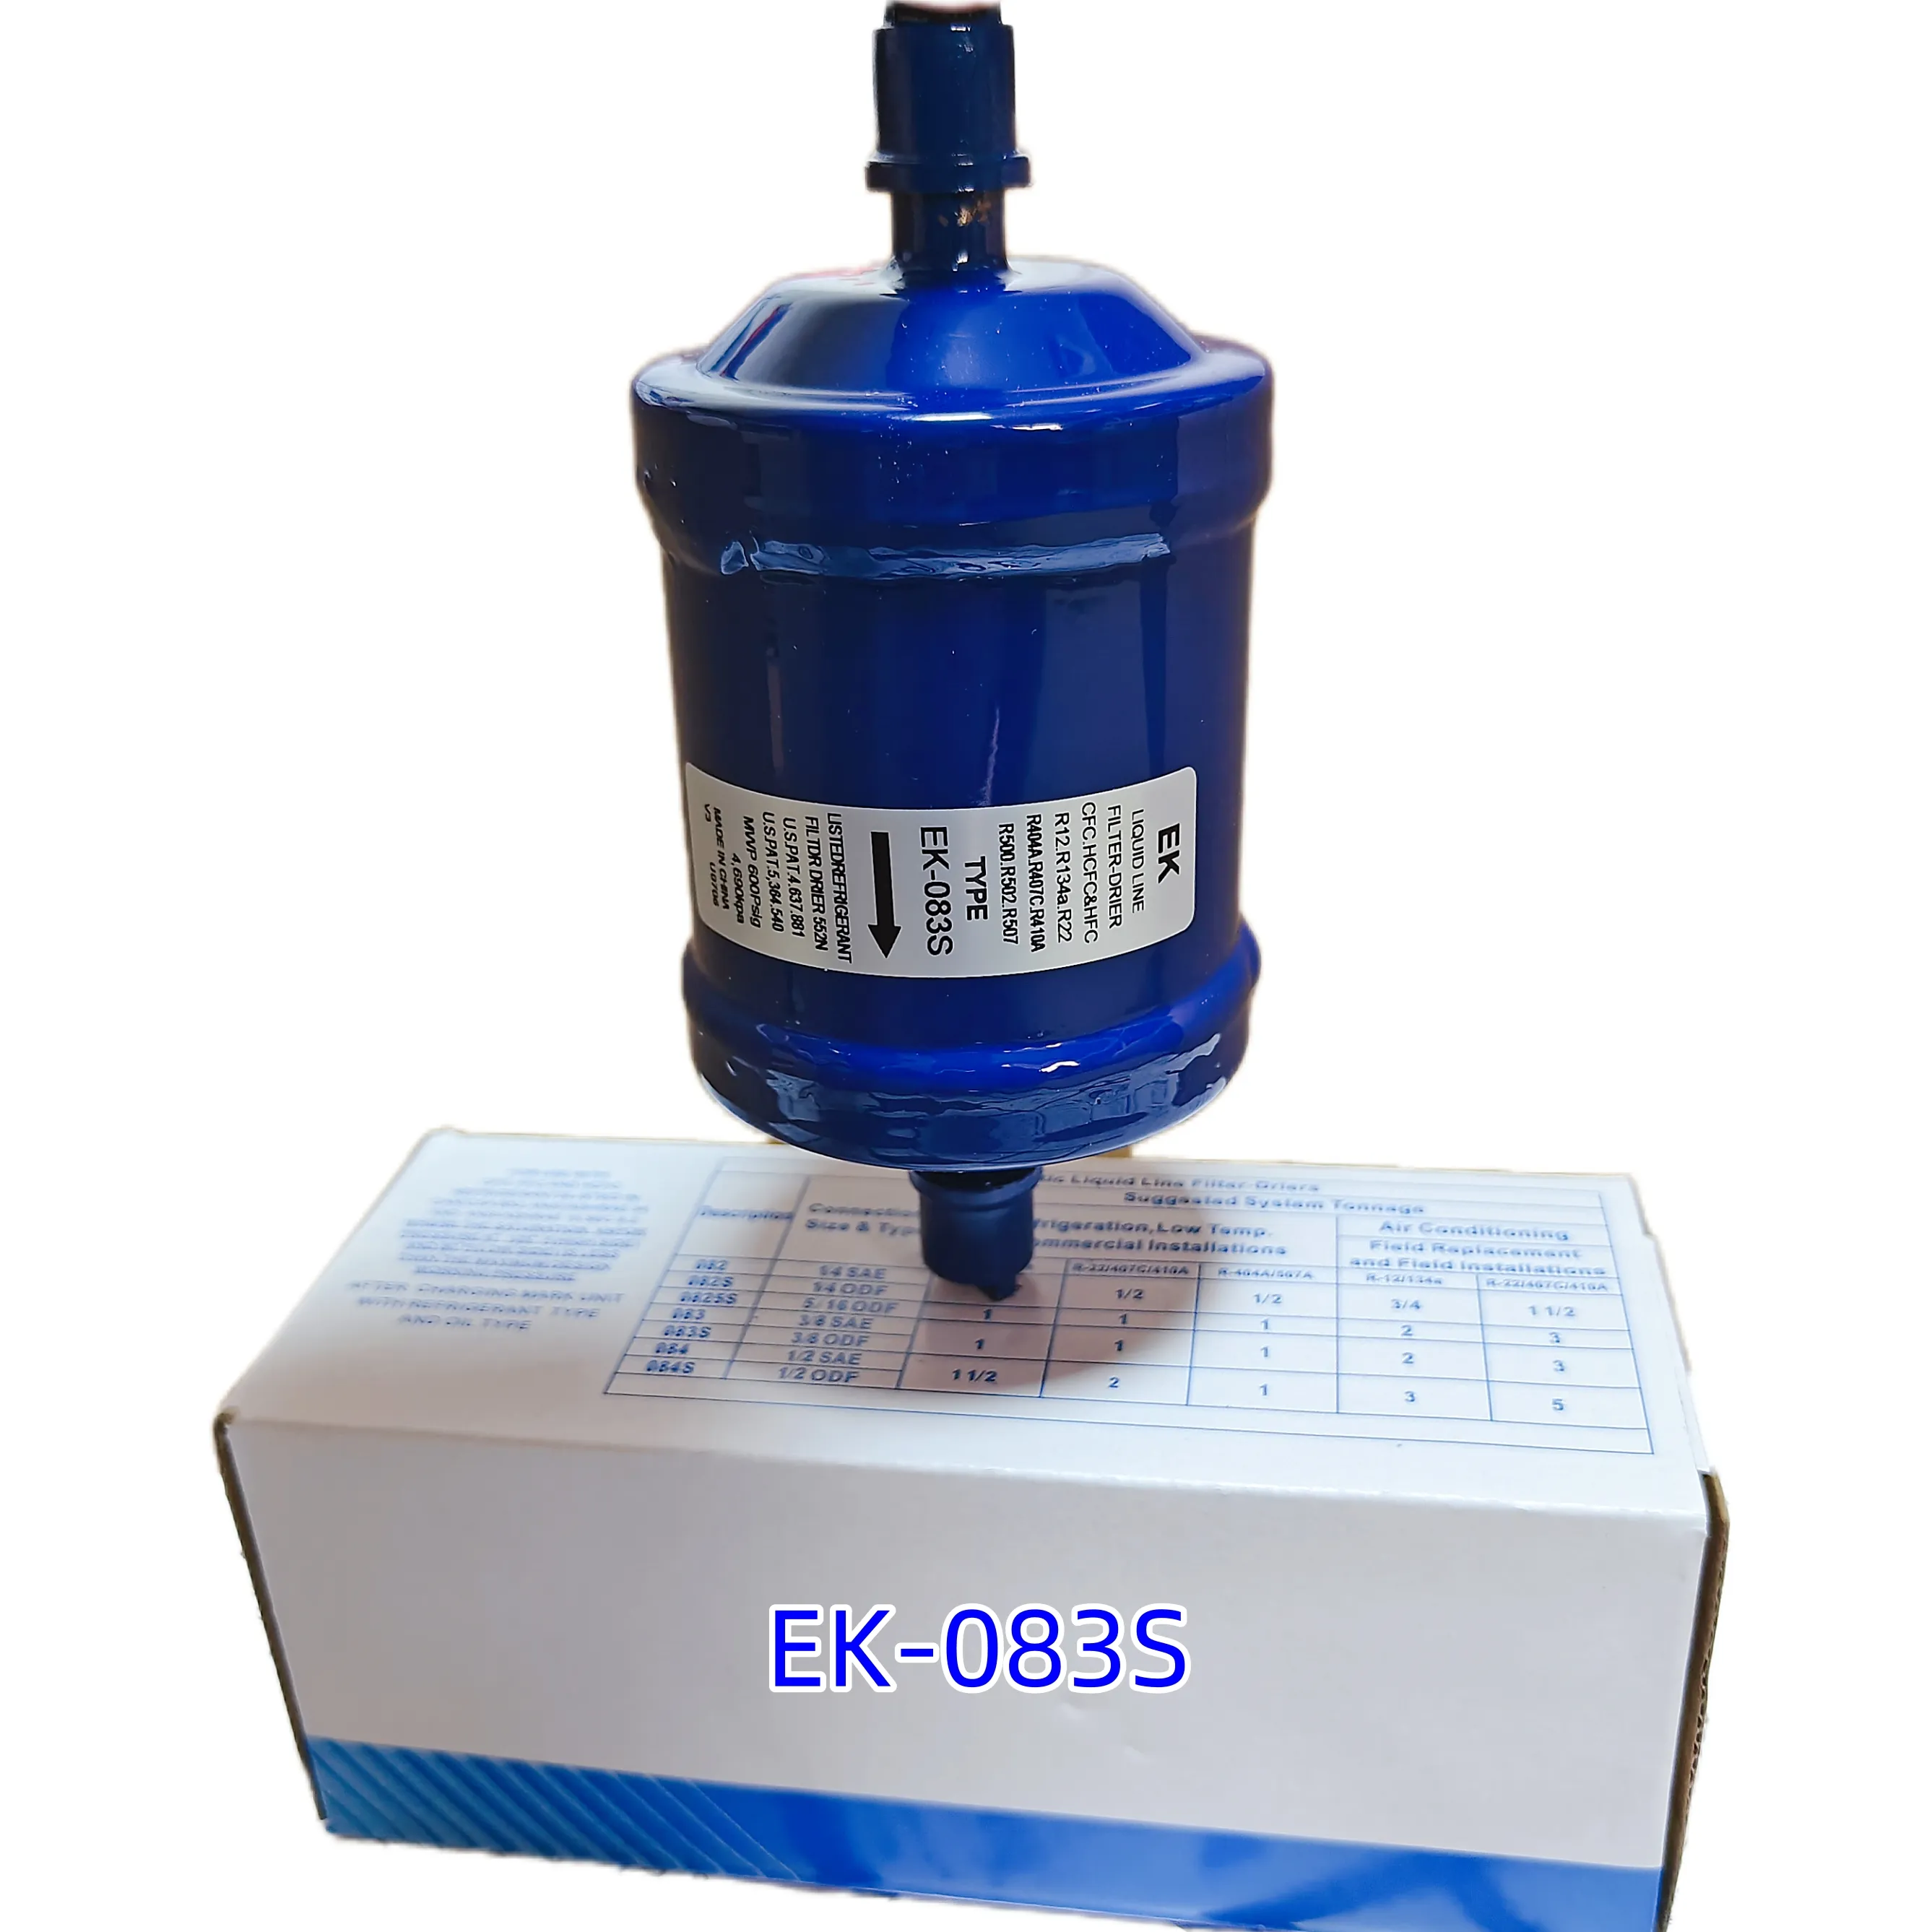 EK-083S High Filtration Accuracy Water Removal Dryer Accessories for Refrigeration & Heat Exchange Systems